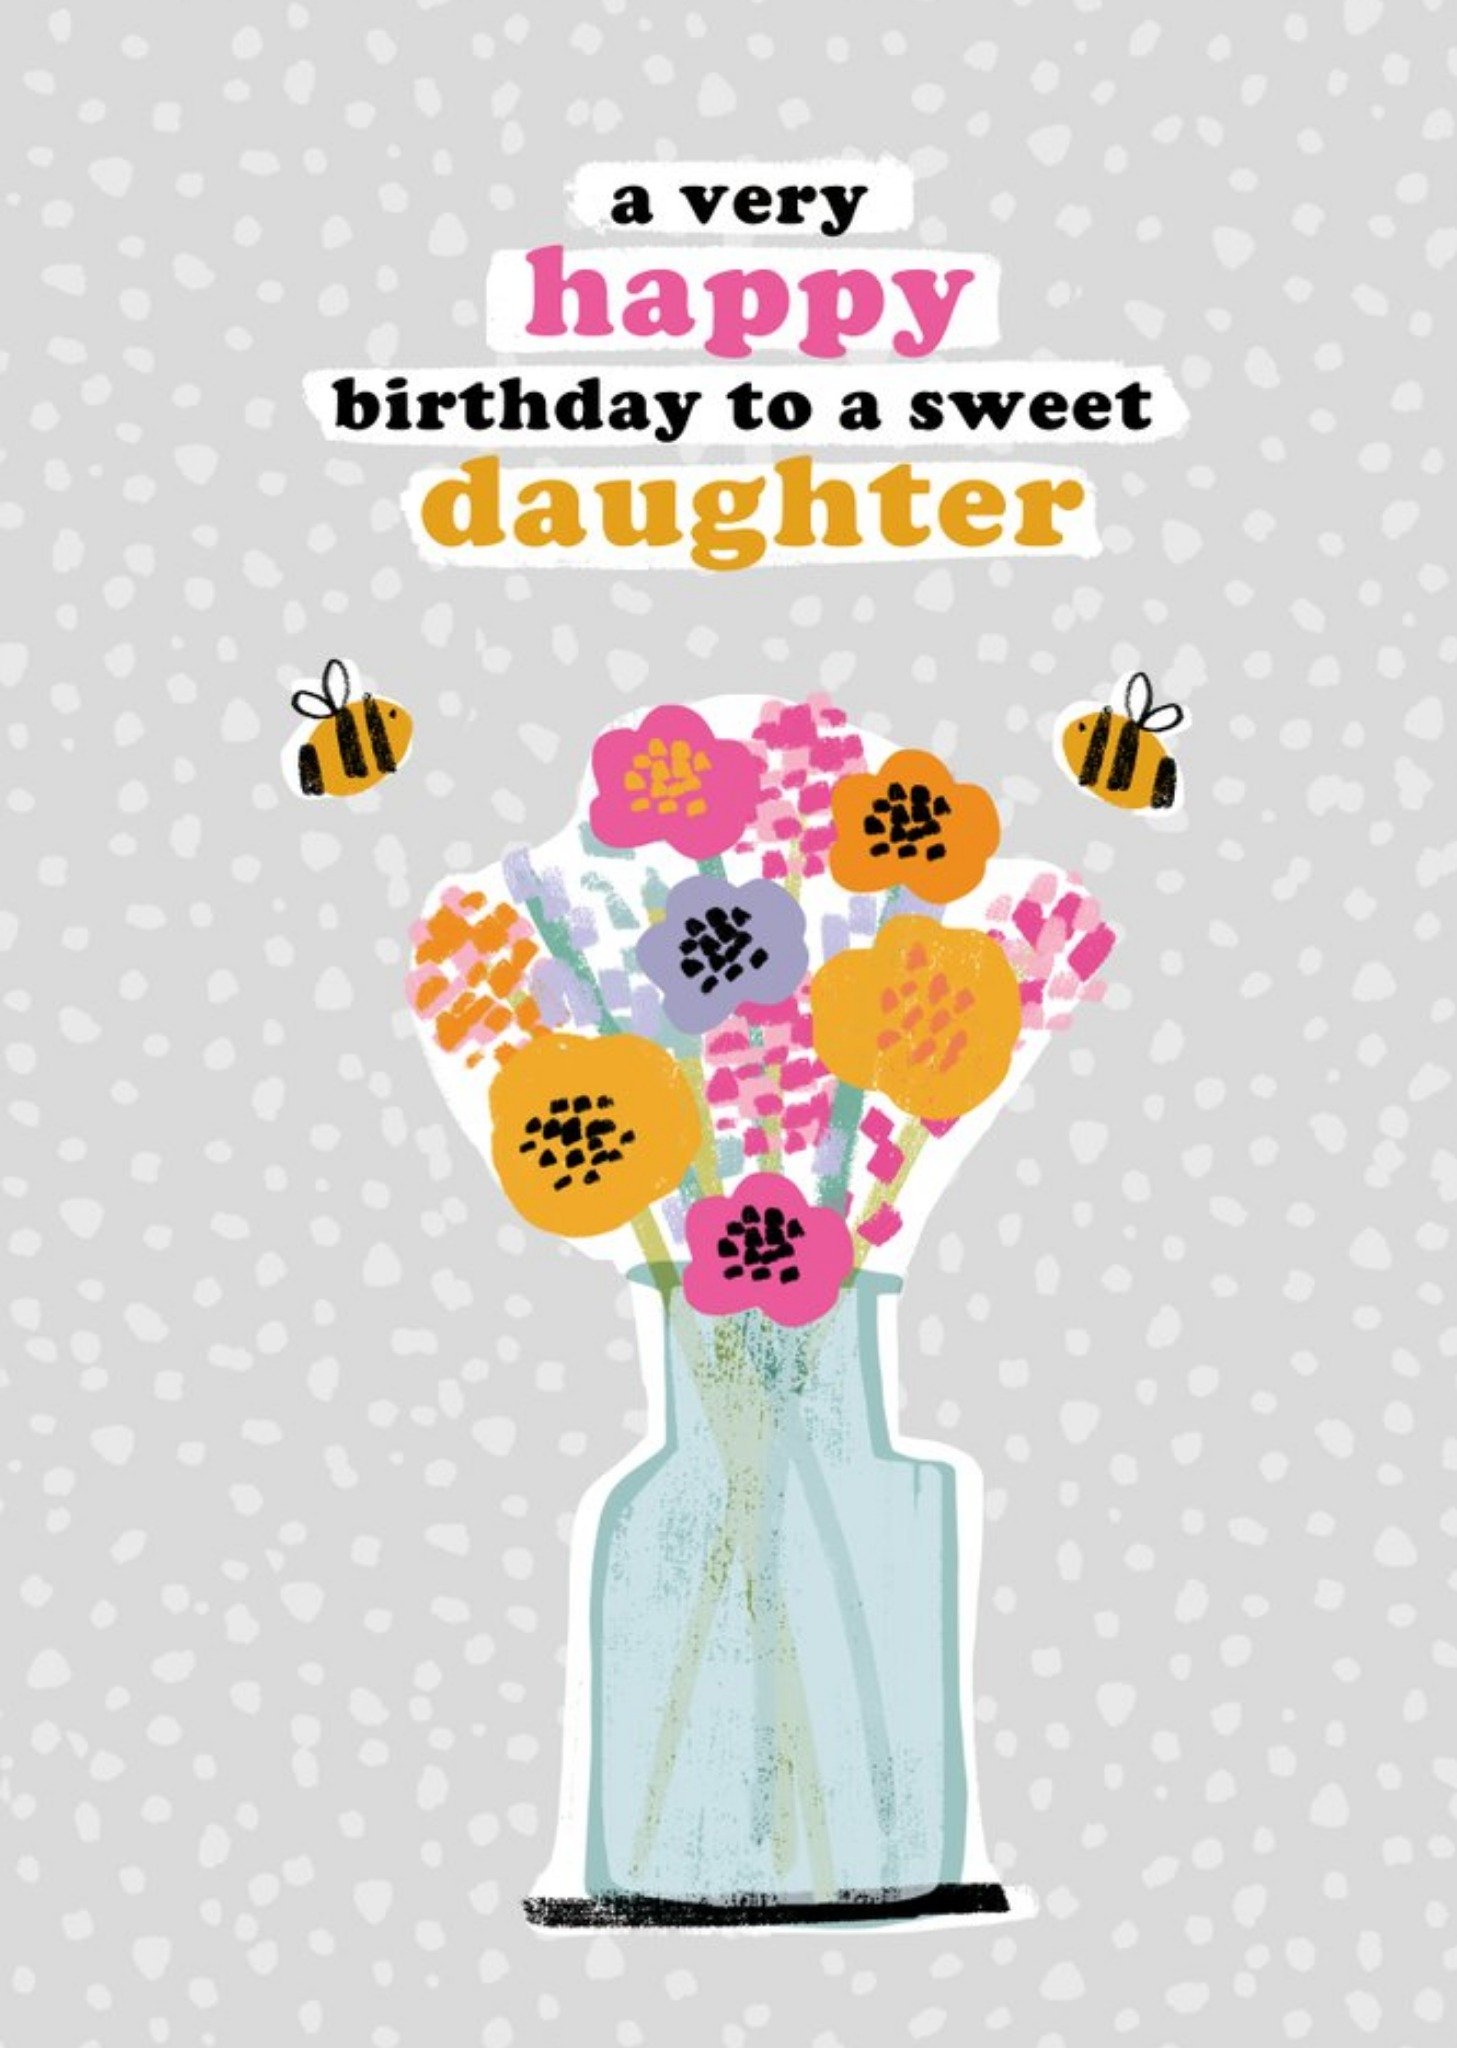 Moonpig So Groovy A Very Happy Birthday To A Sweet Daughter Card Ecard